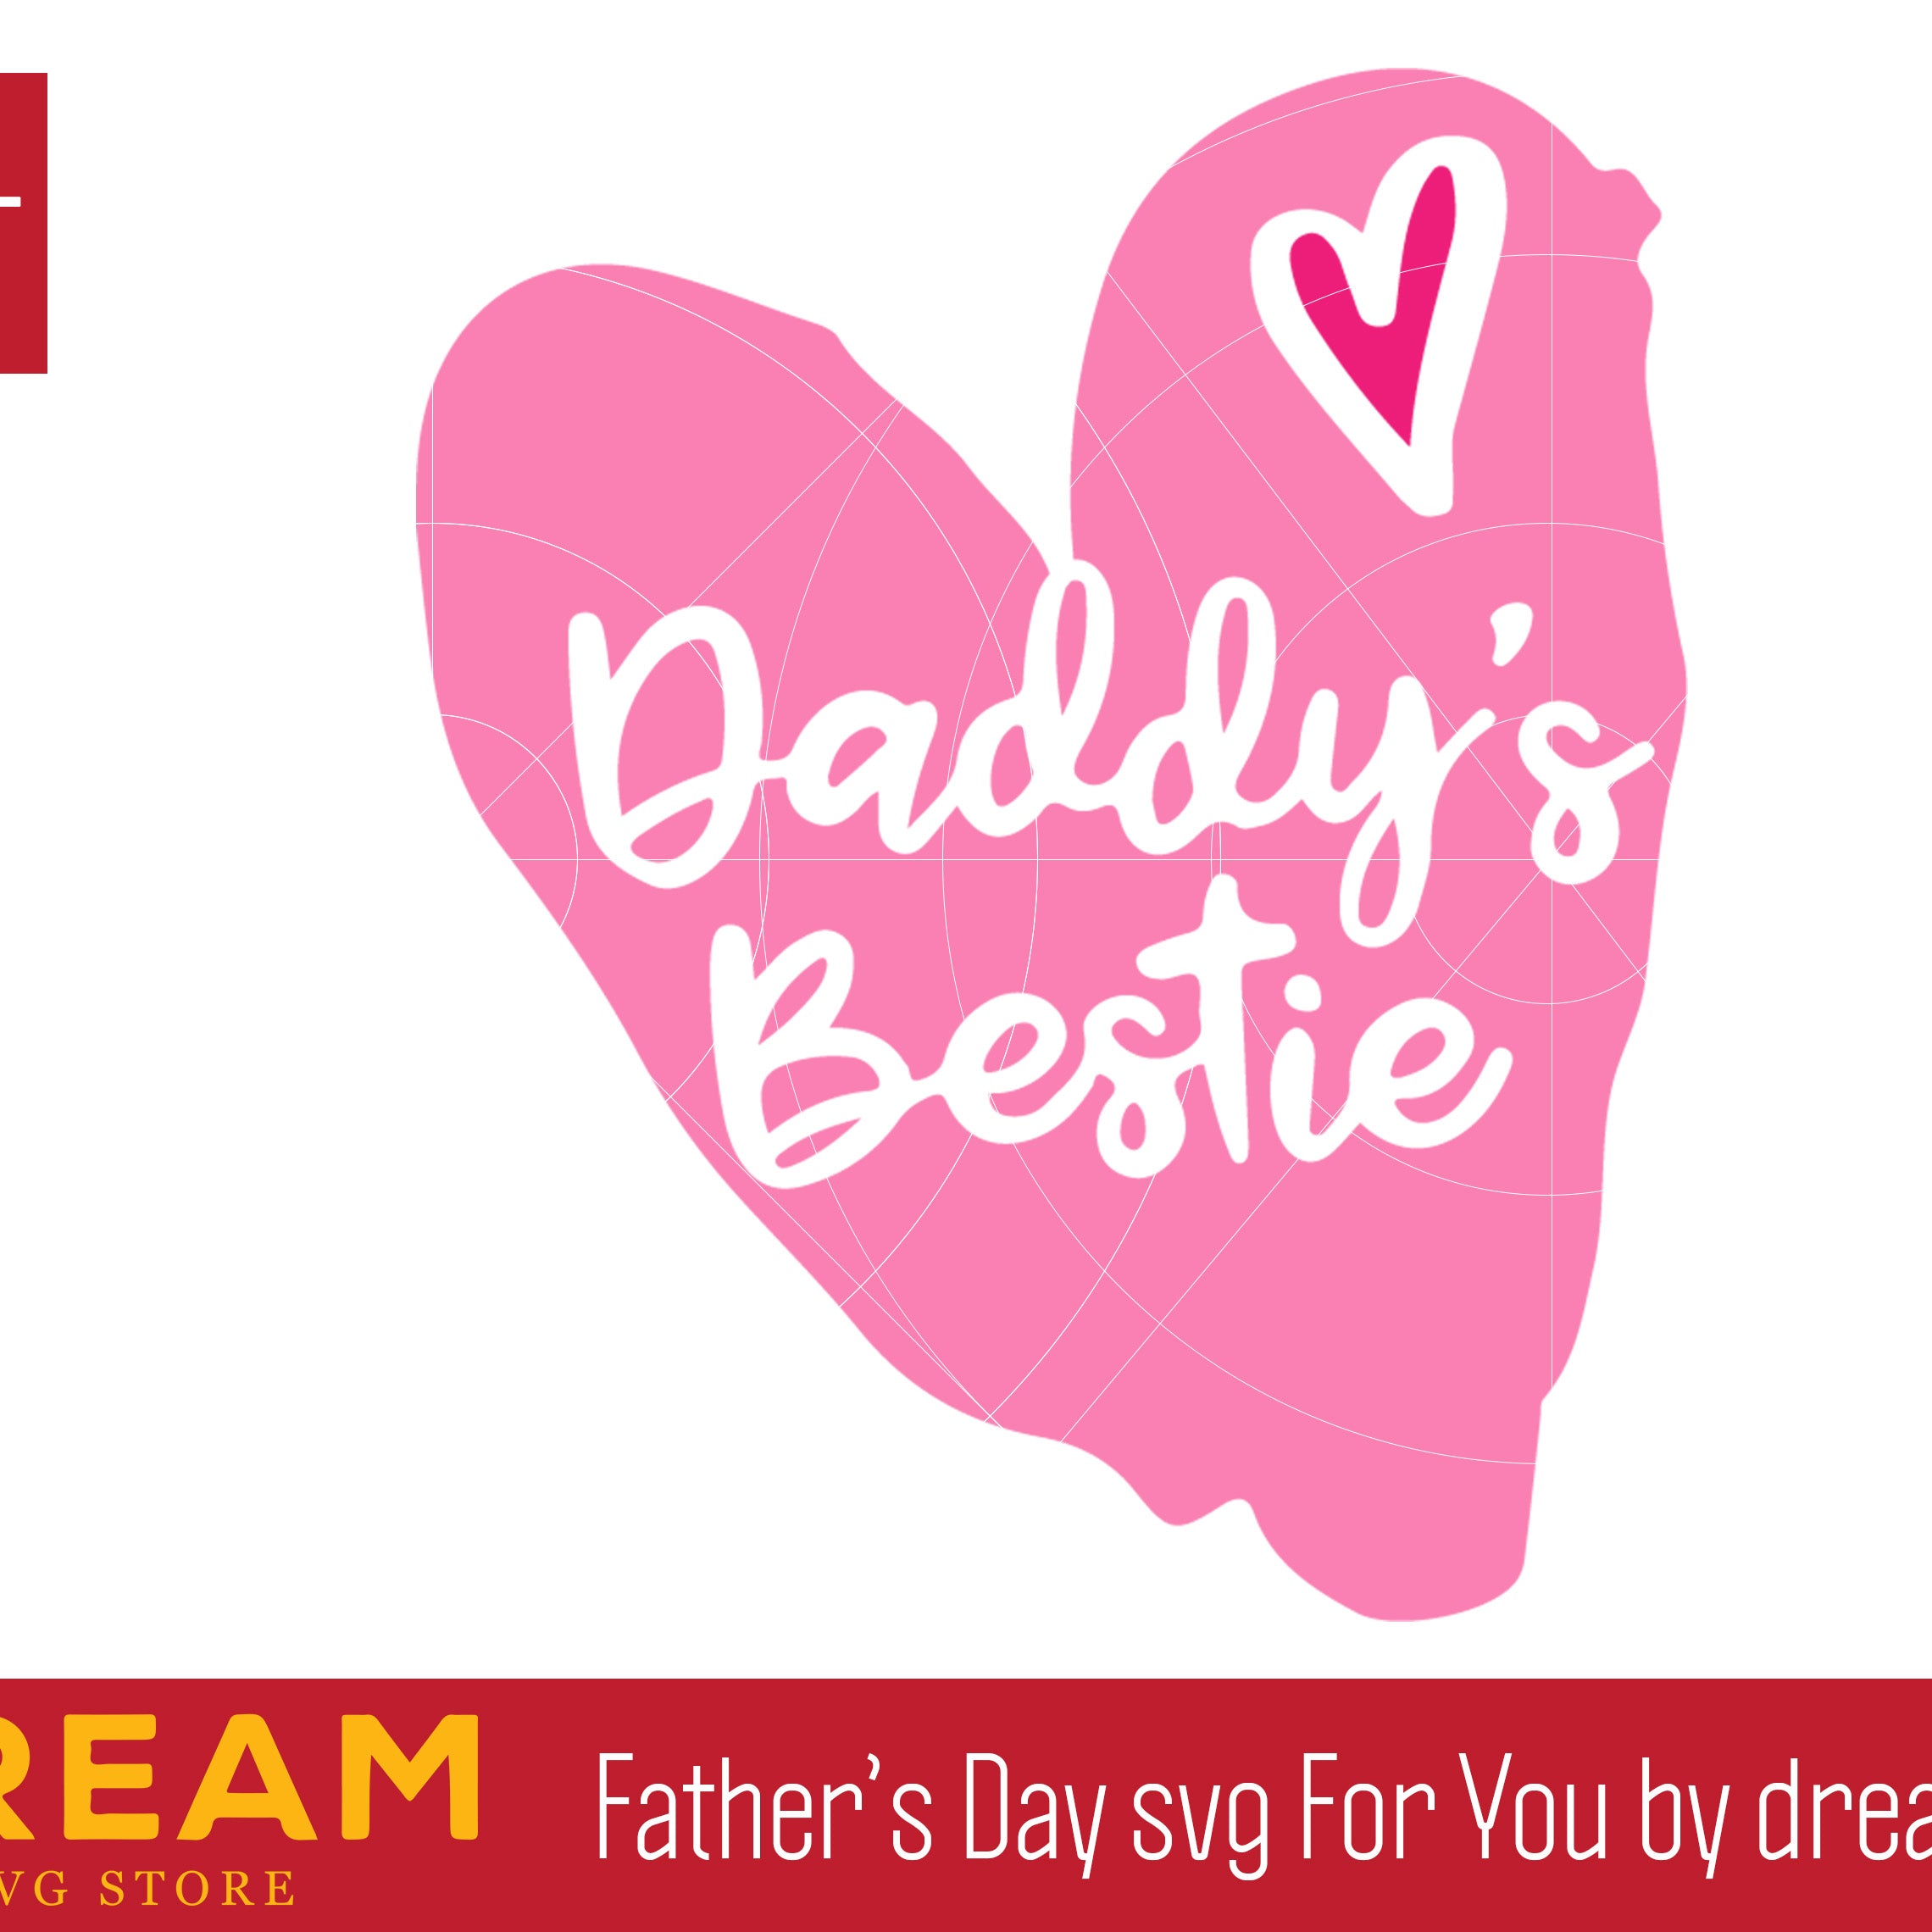 Daddys bestie svg, Mother's day svg, eps, png, dxf